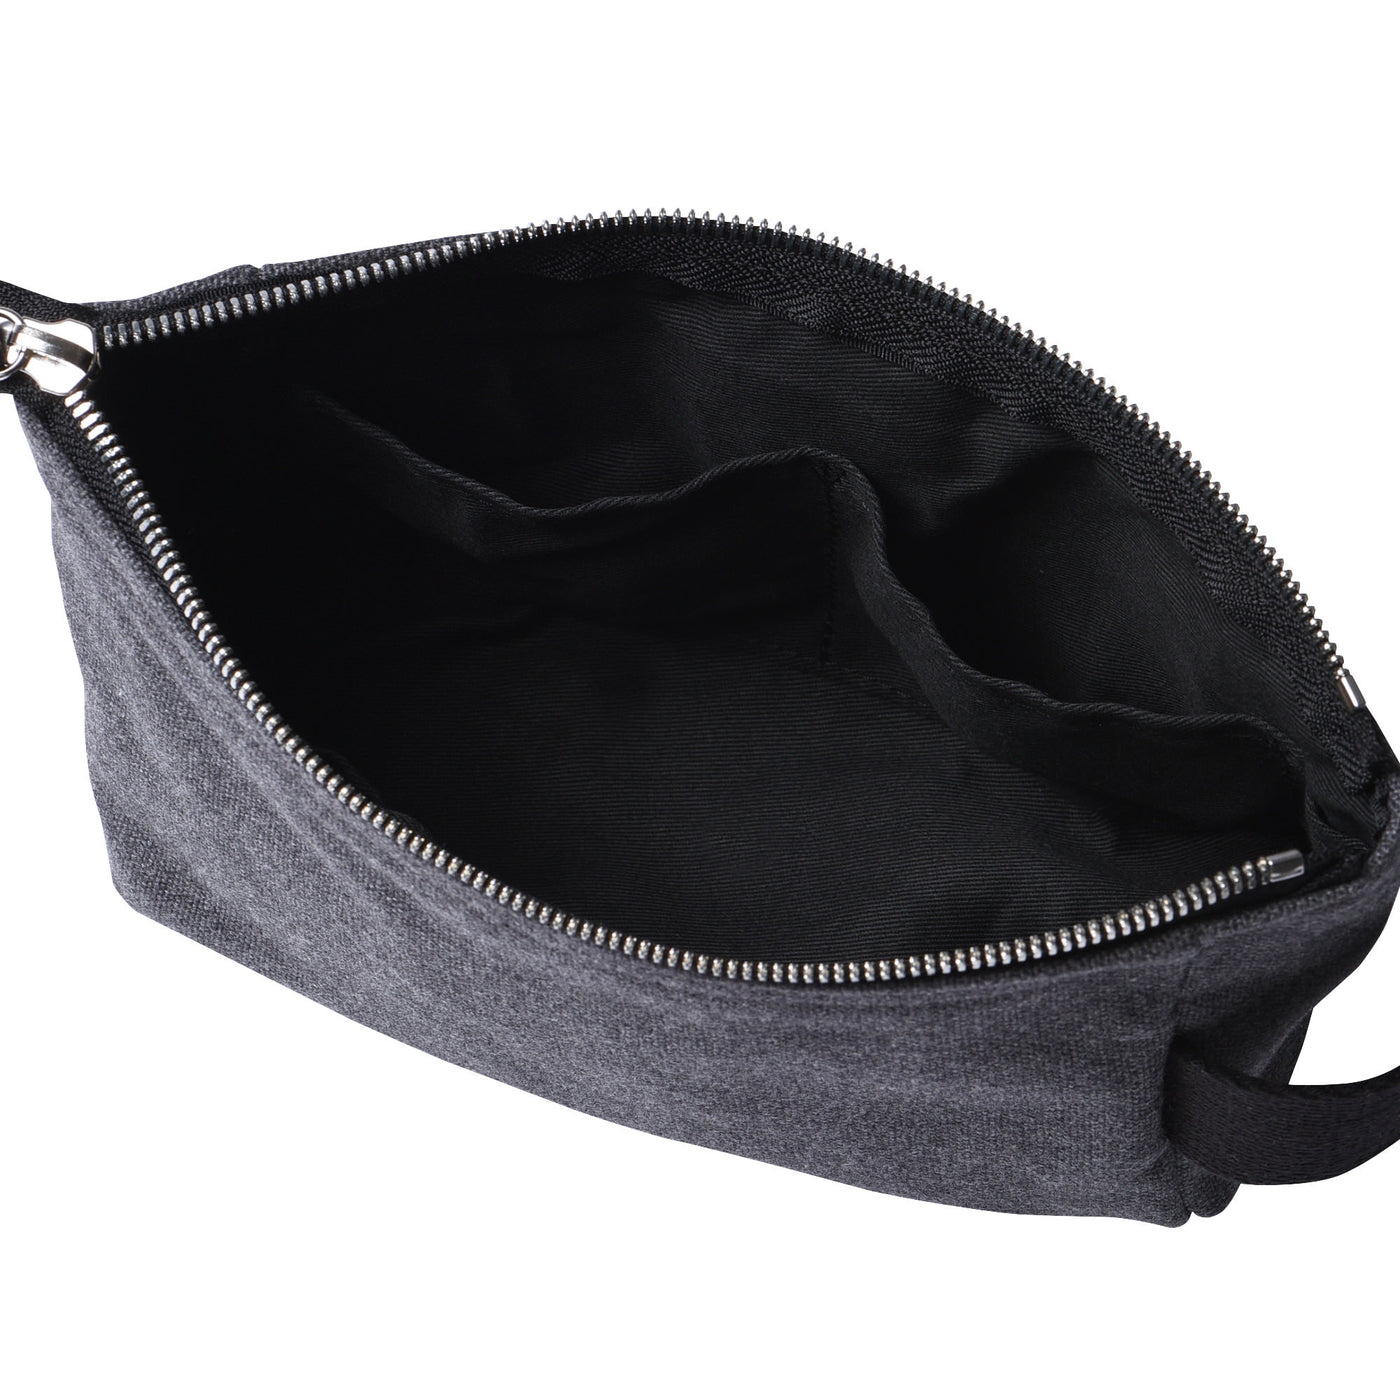 GROOMING POUCH